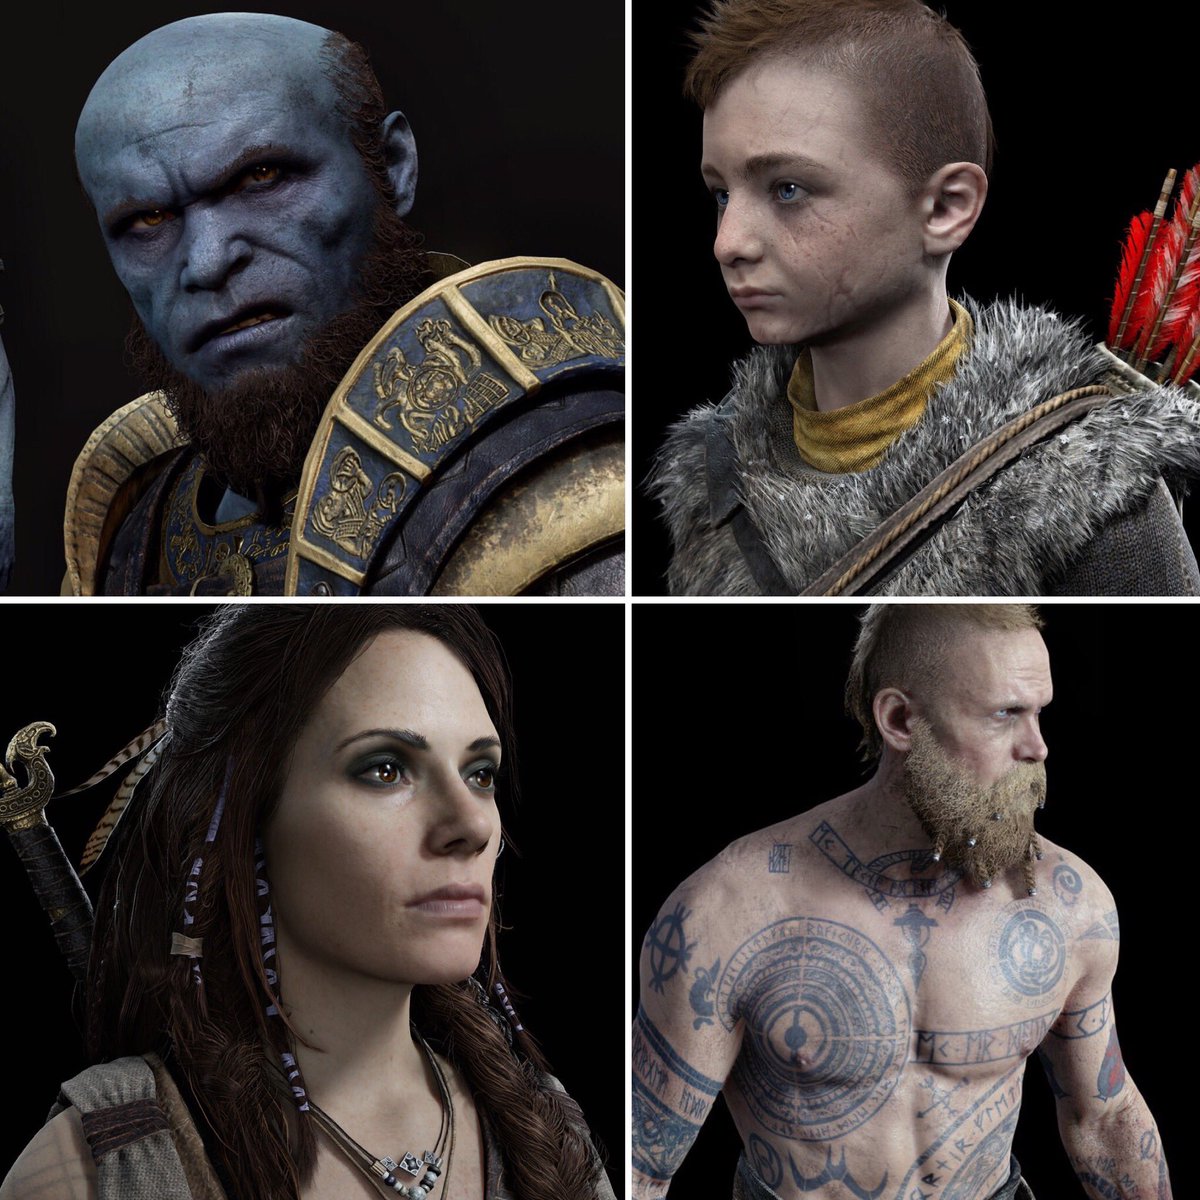 Happy 2 year anniversary of God of War! ?❤️
I'm constantly blown away by the amount of fanart and photos of the game. You guys are incredible!
Helping to create these characters has been one of the highlights of my career. Much love to the team at @SonySantaMonica @corybarlog 